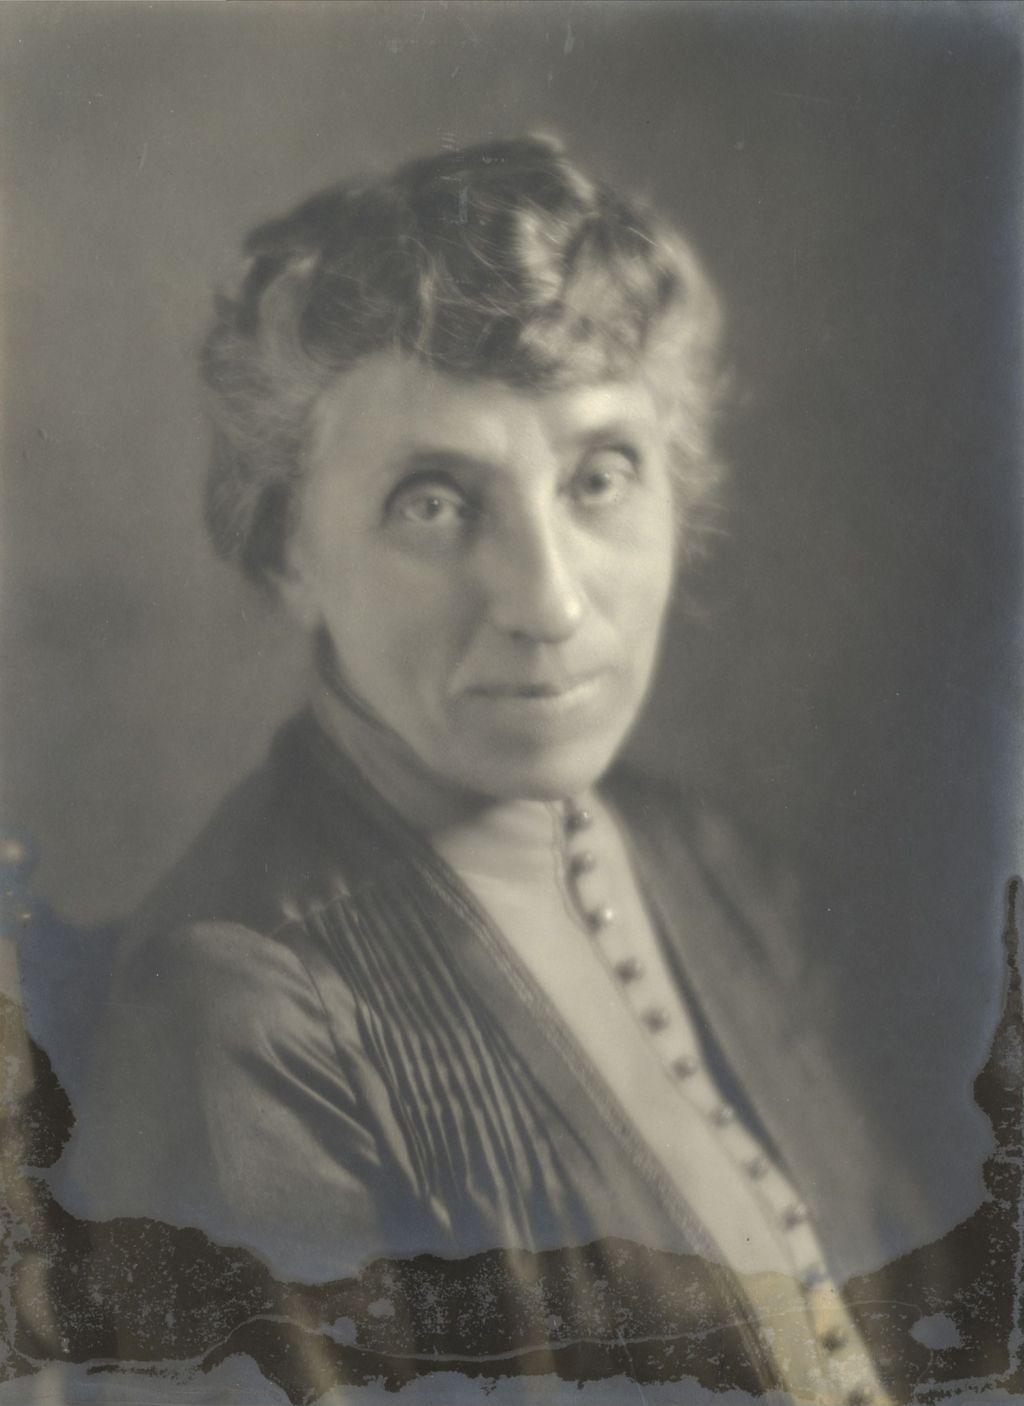 Hull-House resident and director of the United States Children's Bureau Julia Lathrop